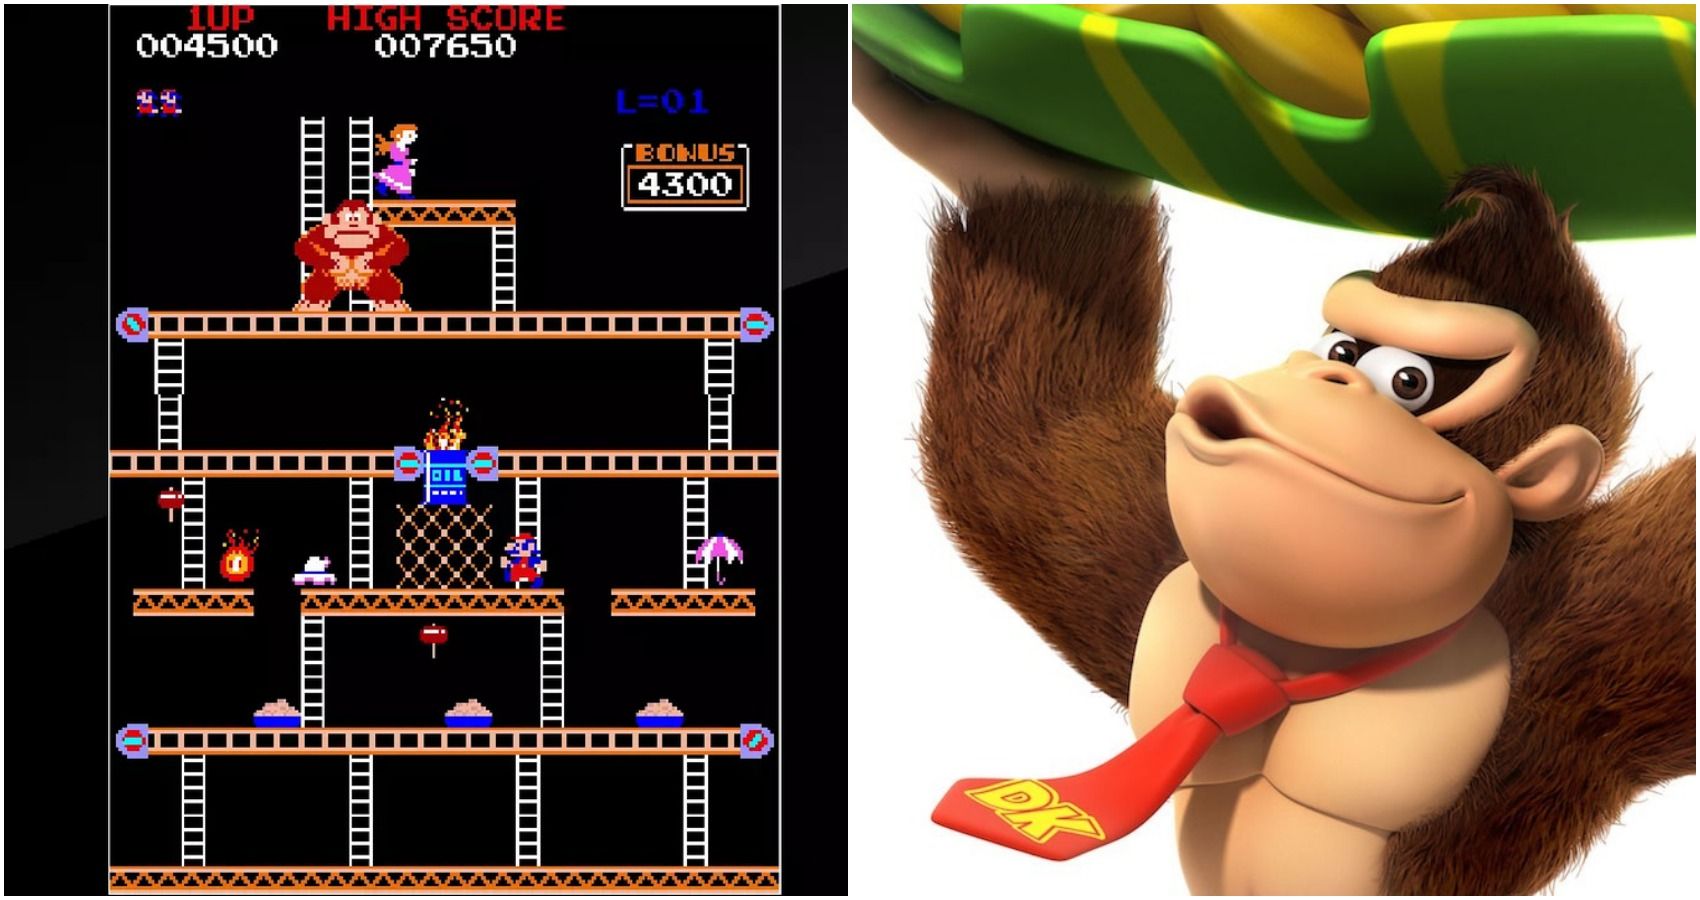 donkey-kong-10-mind-blowing-facts-you-didn-t-know-about-the-arcade-classic